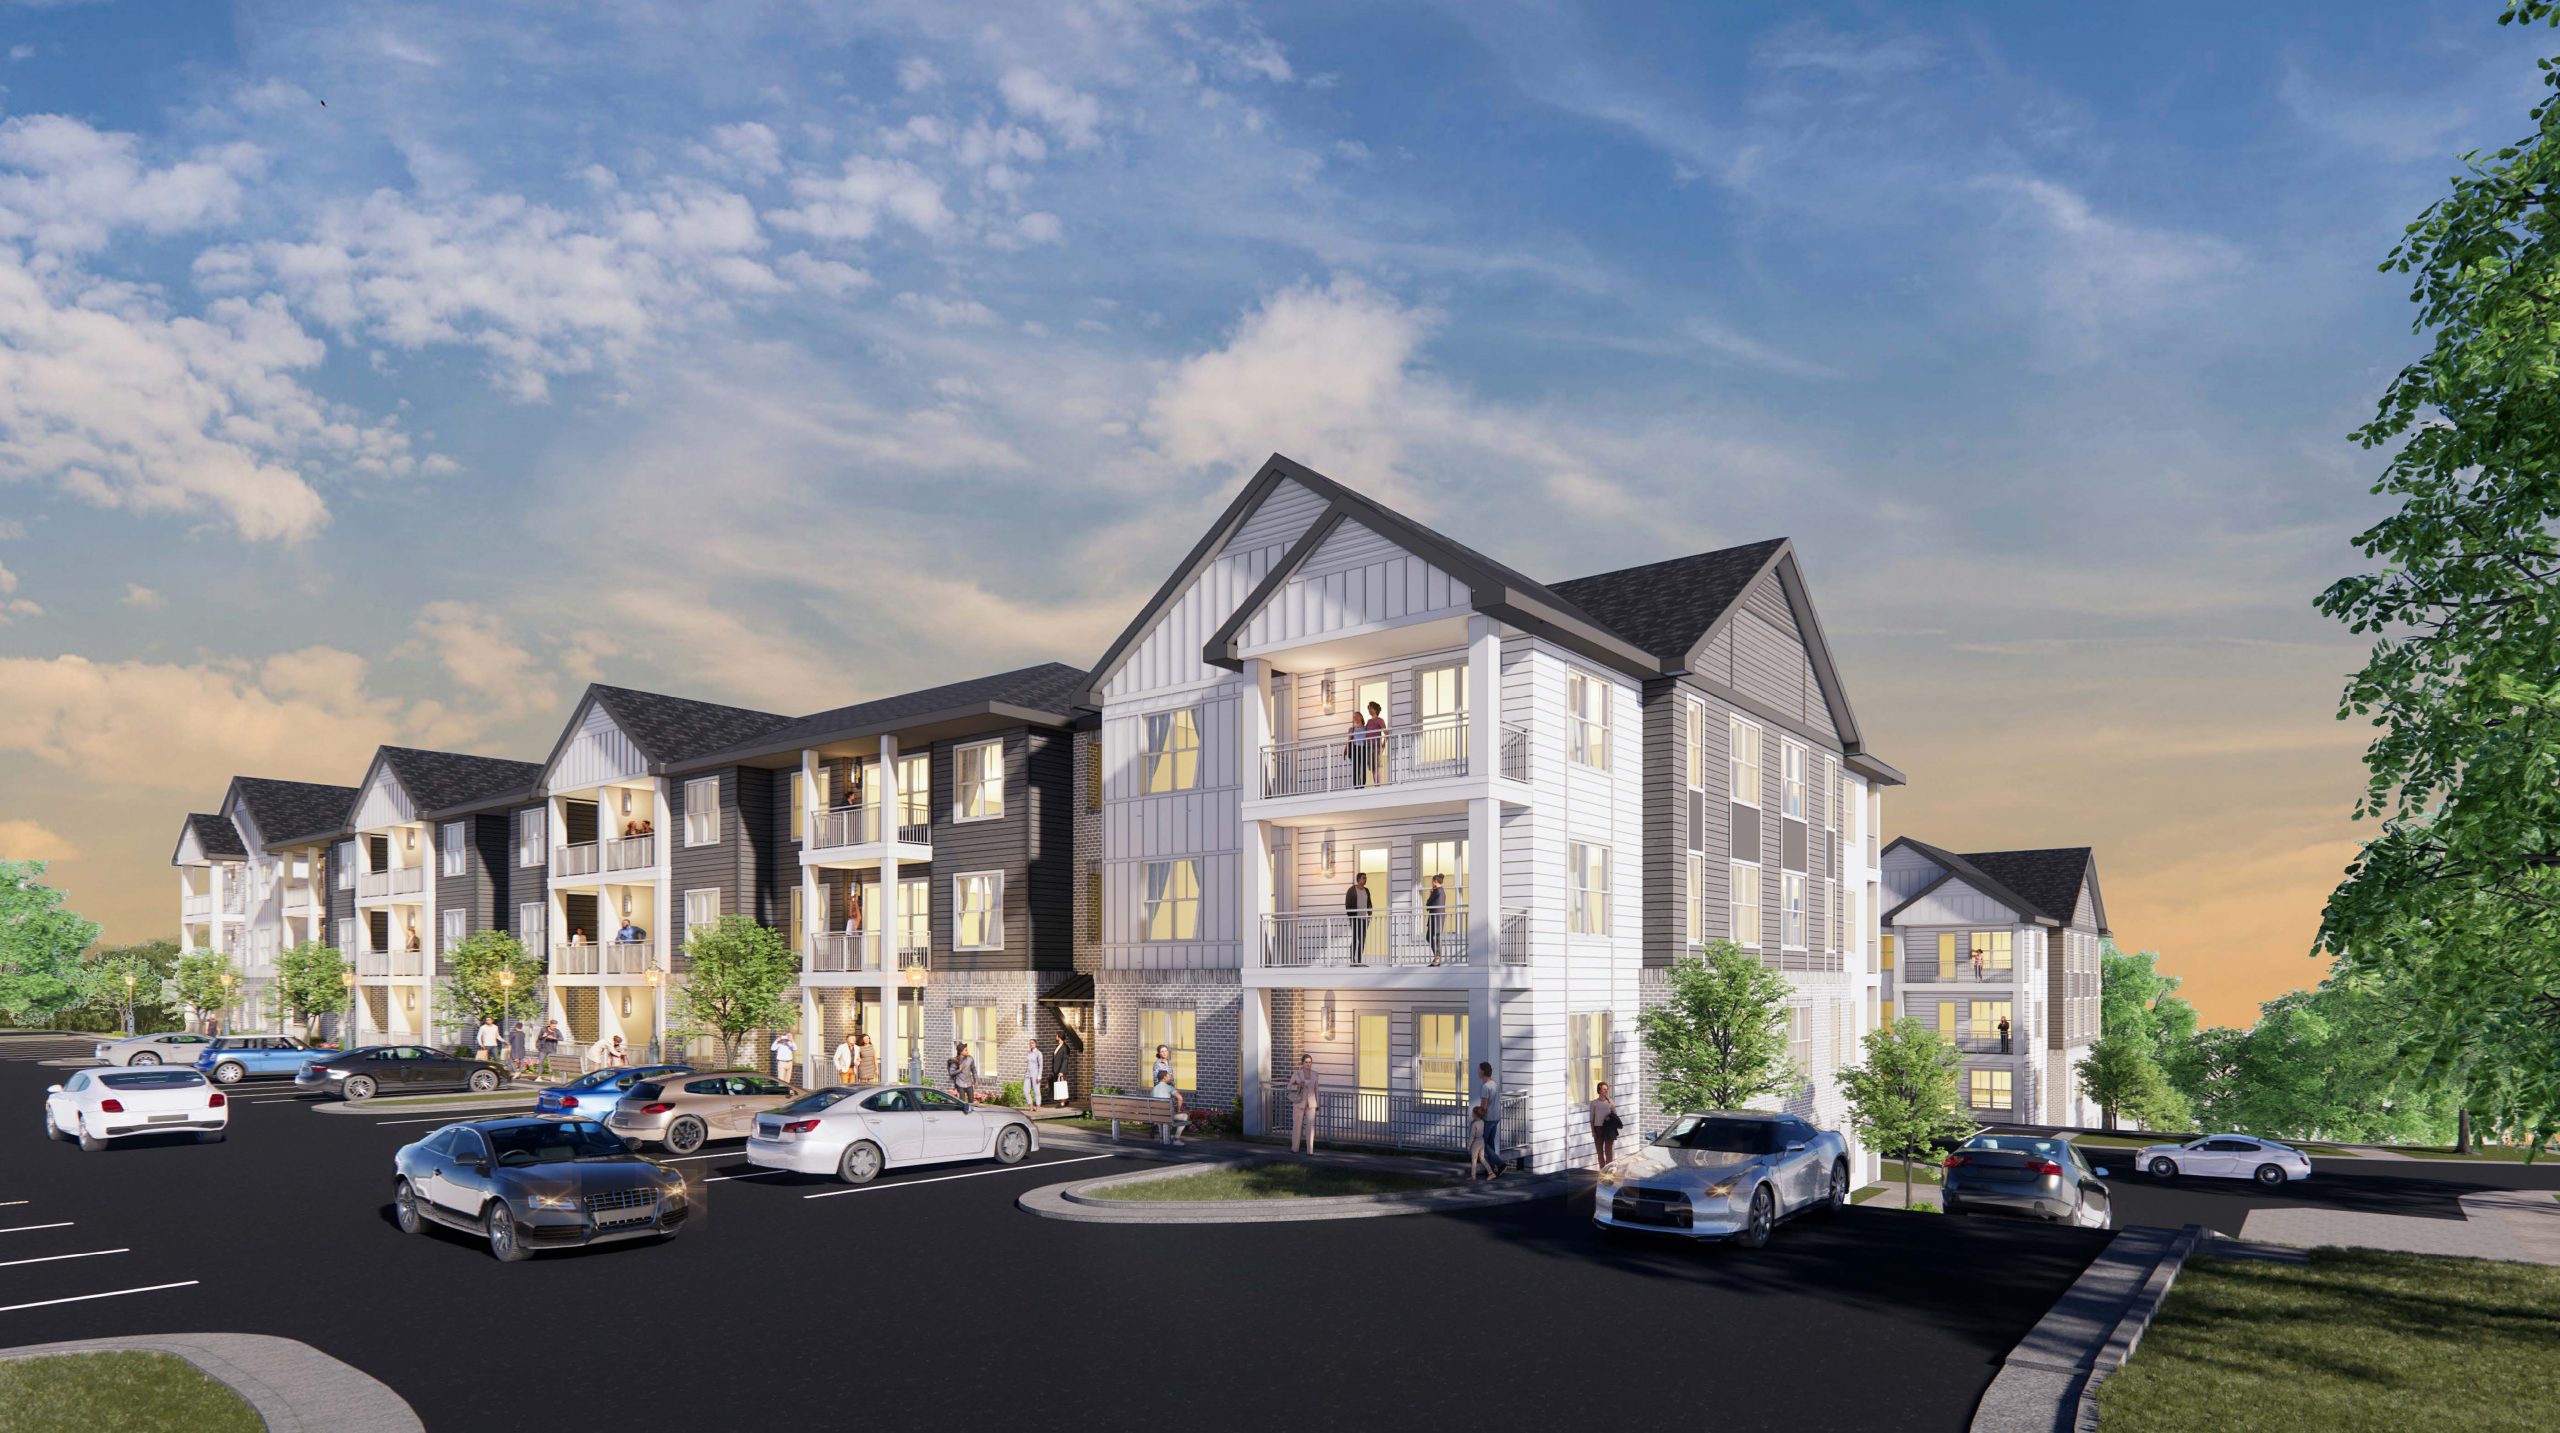 Rendering of The Flats at East Lake